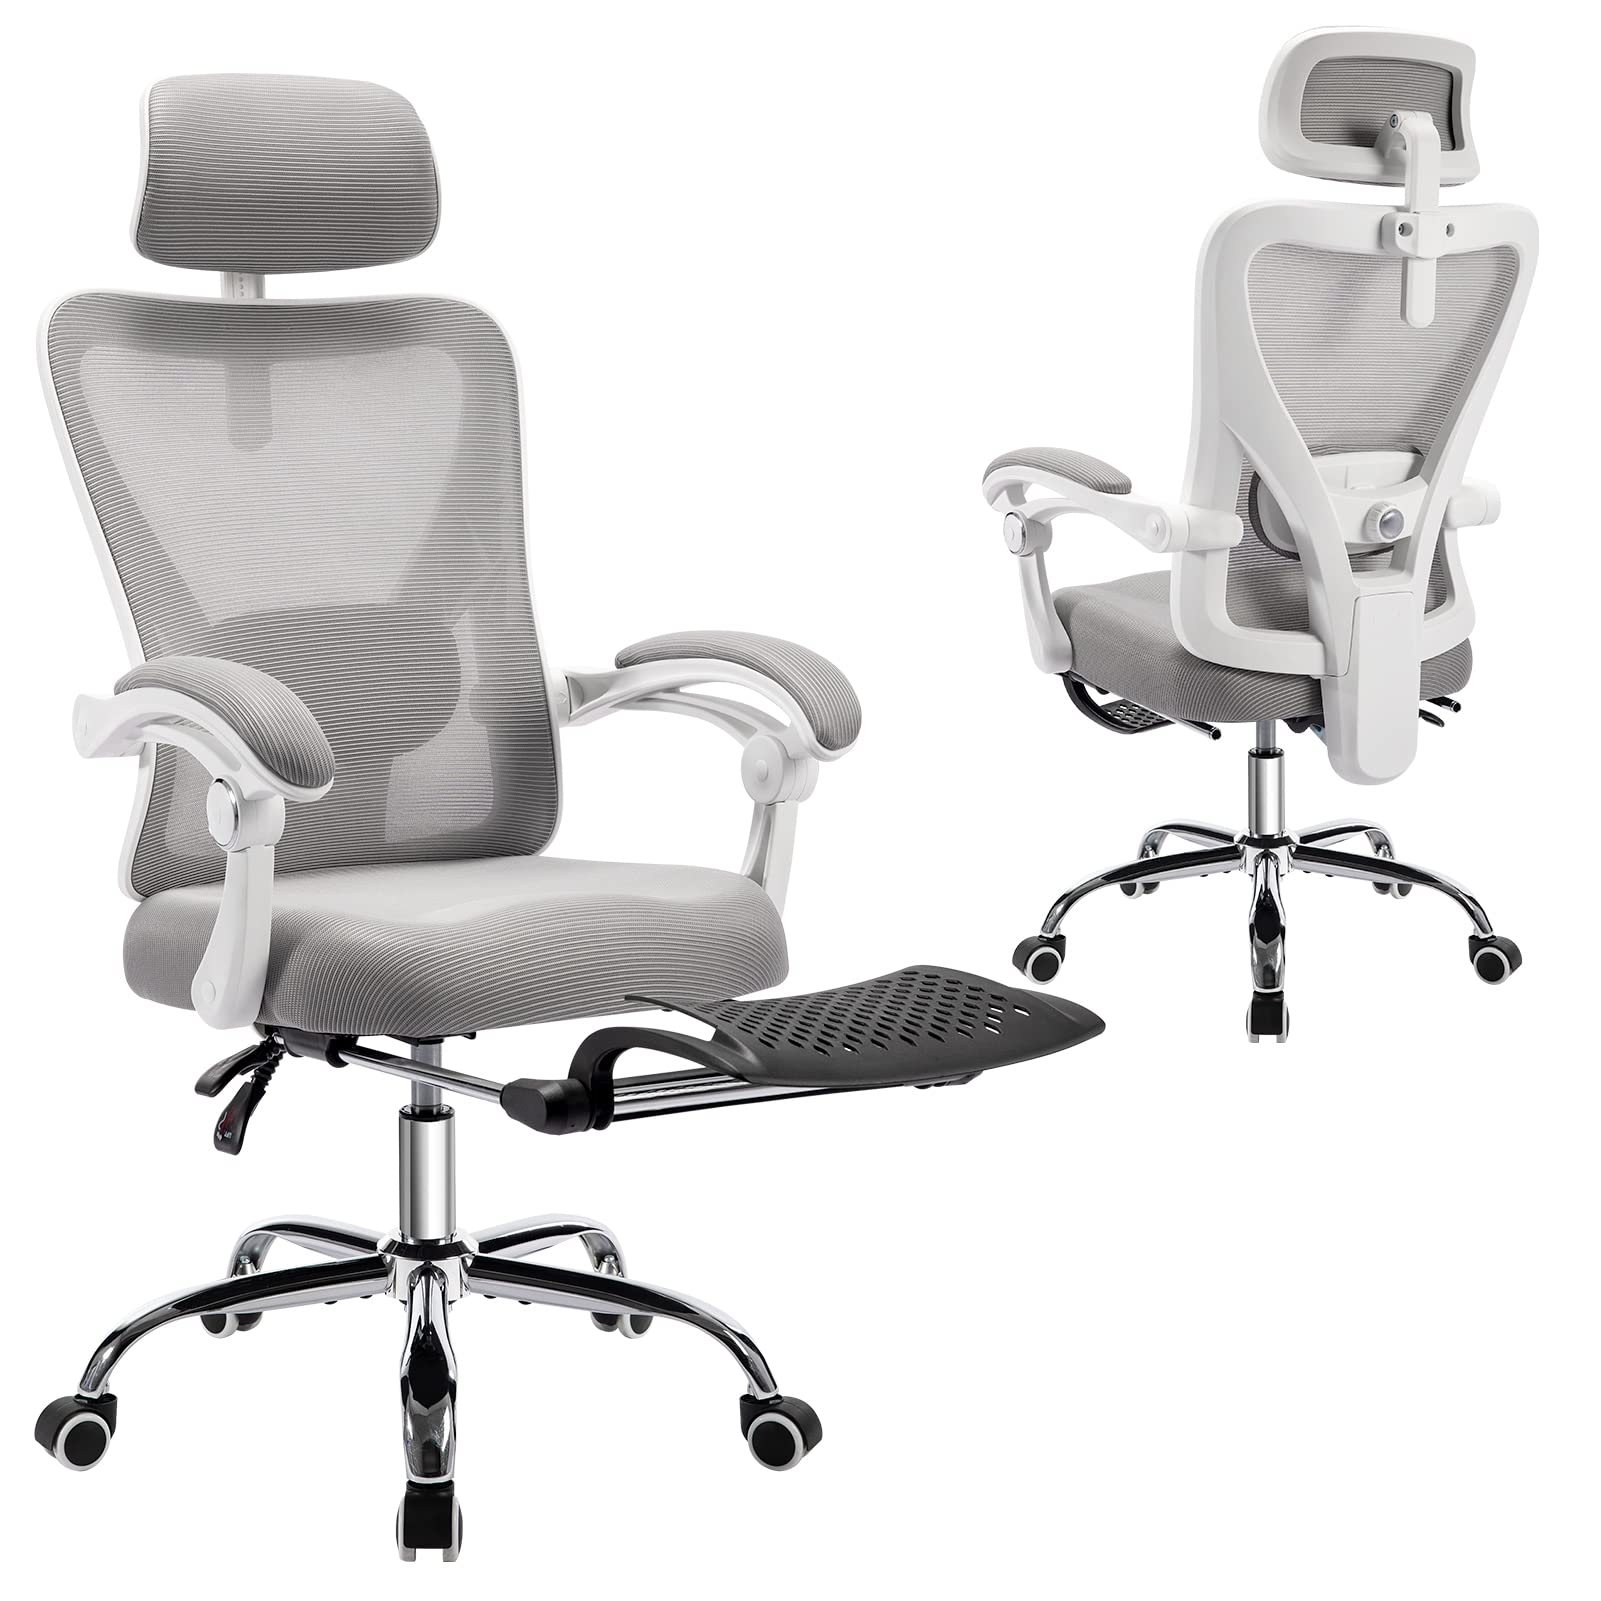 ACCHAR Ergonomic Office Chair Reclining Mesh Chair Computer Desk Chair Swivel Rolling Home Task Chair with Padded Armrests